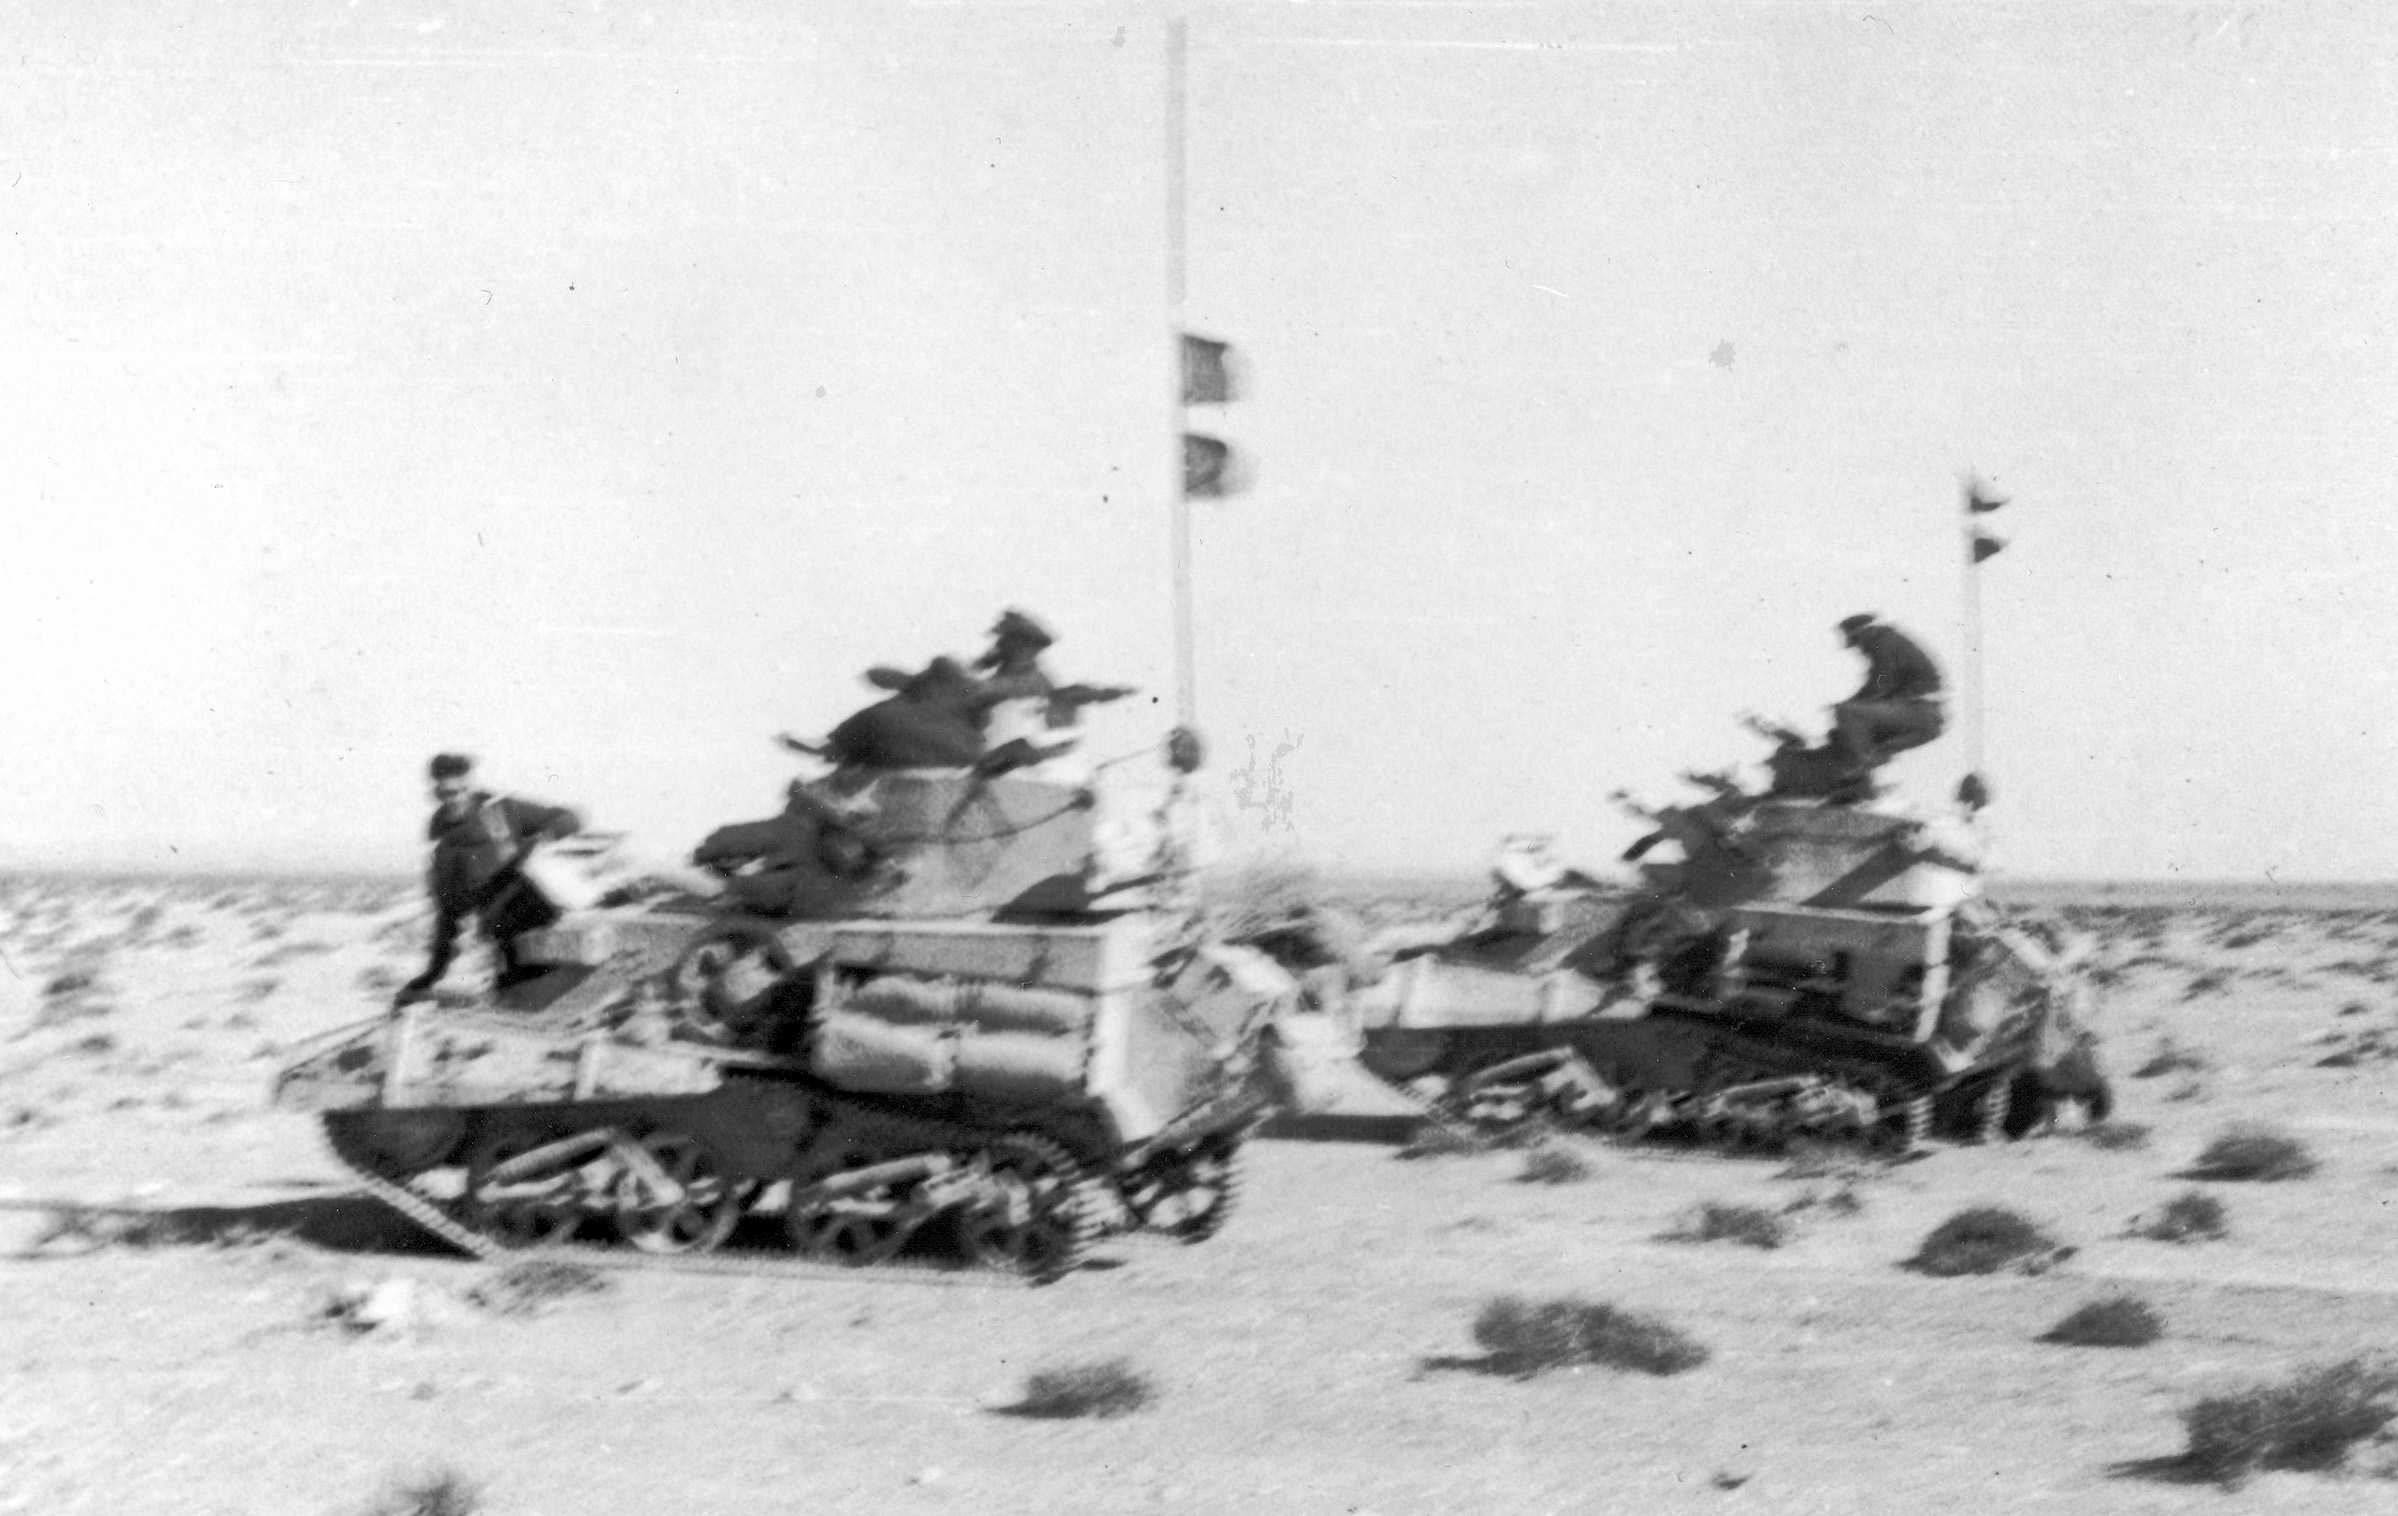 Speeding toward the action at Buq Buq, light tanks carry the commanding officer and adjutant of the British 4th Hussars on December 11, 1940.